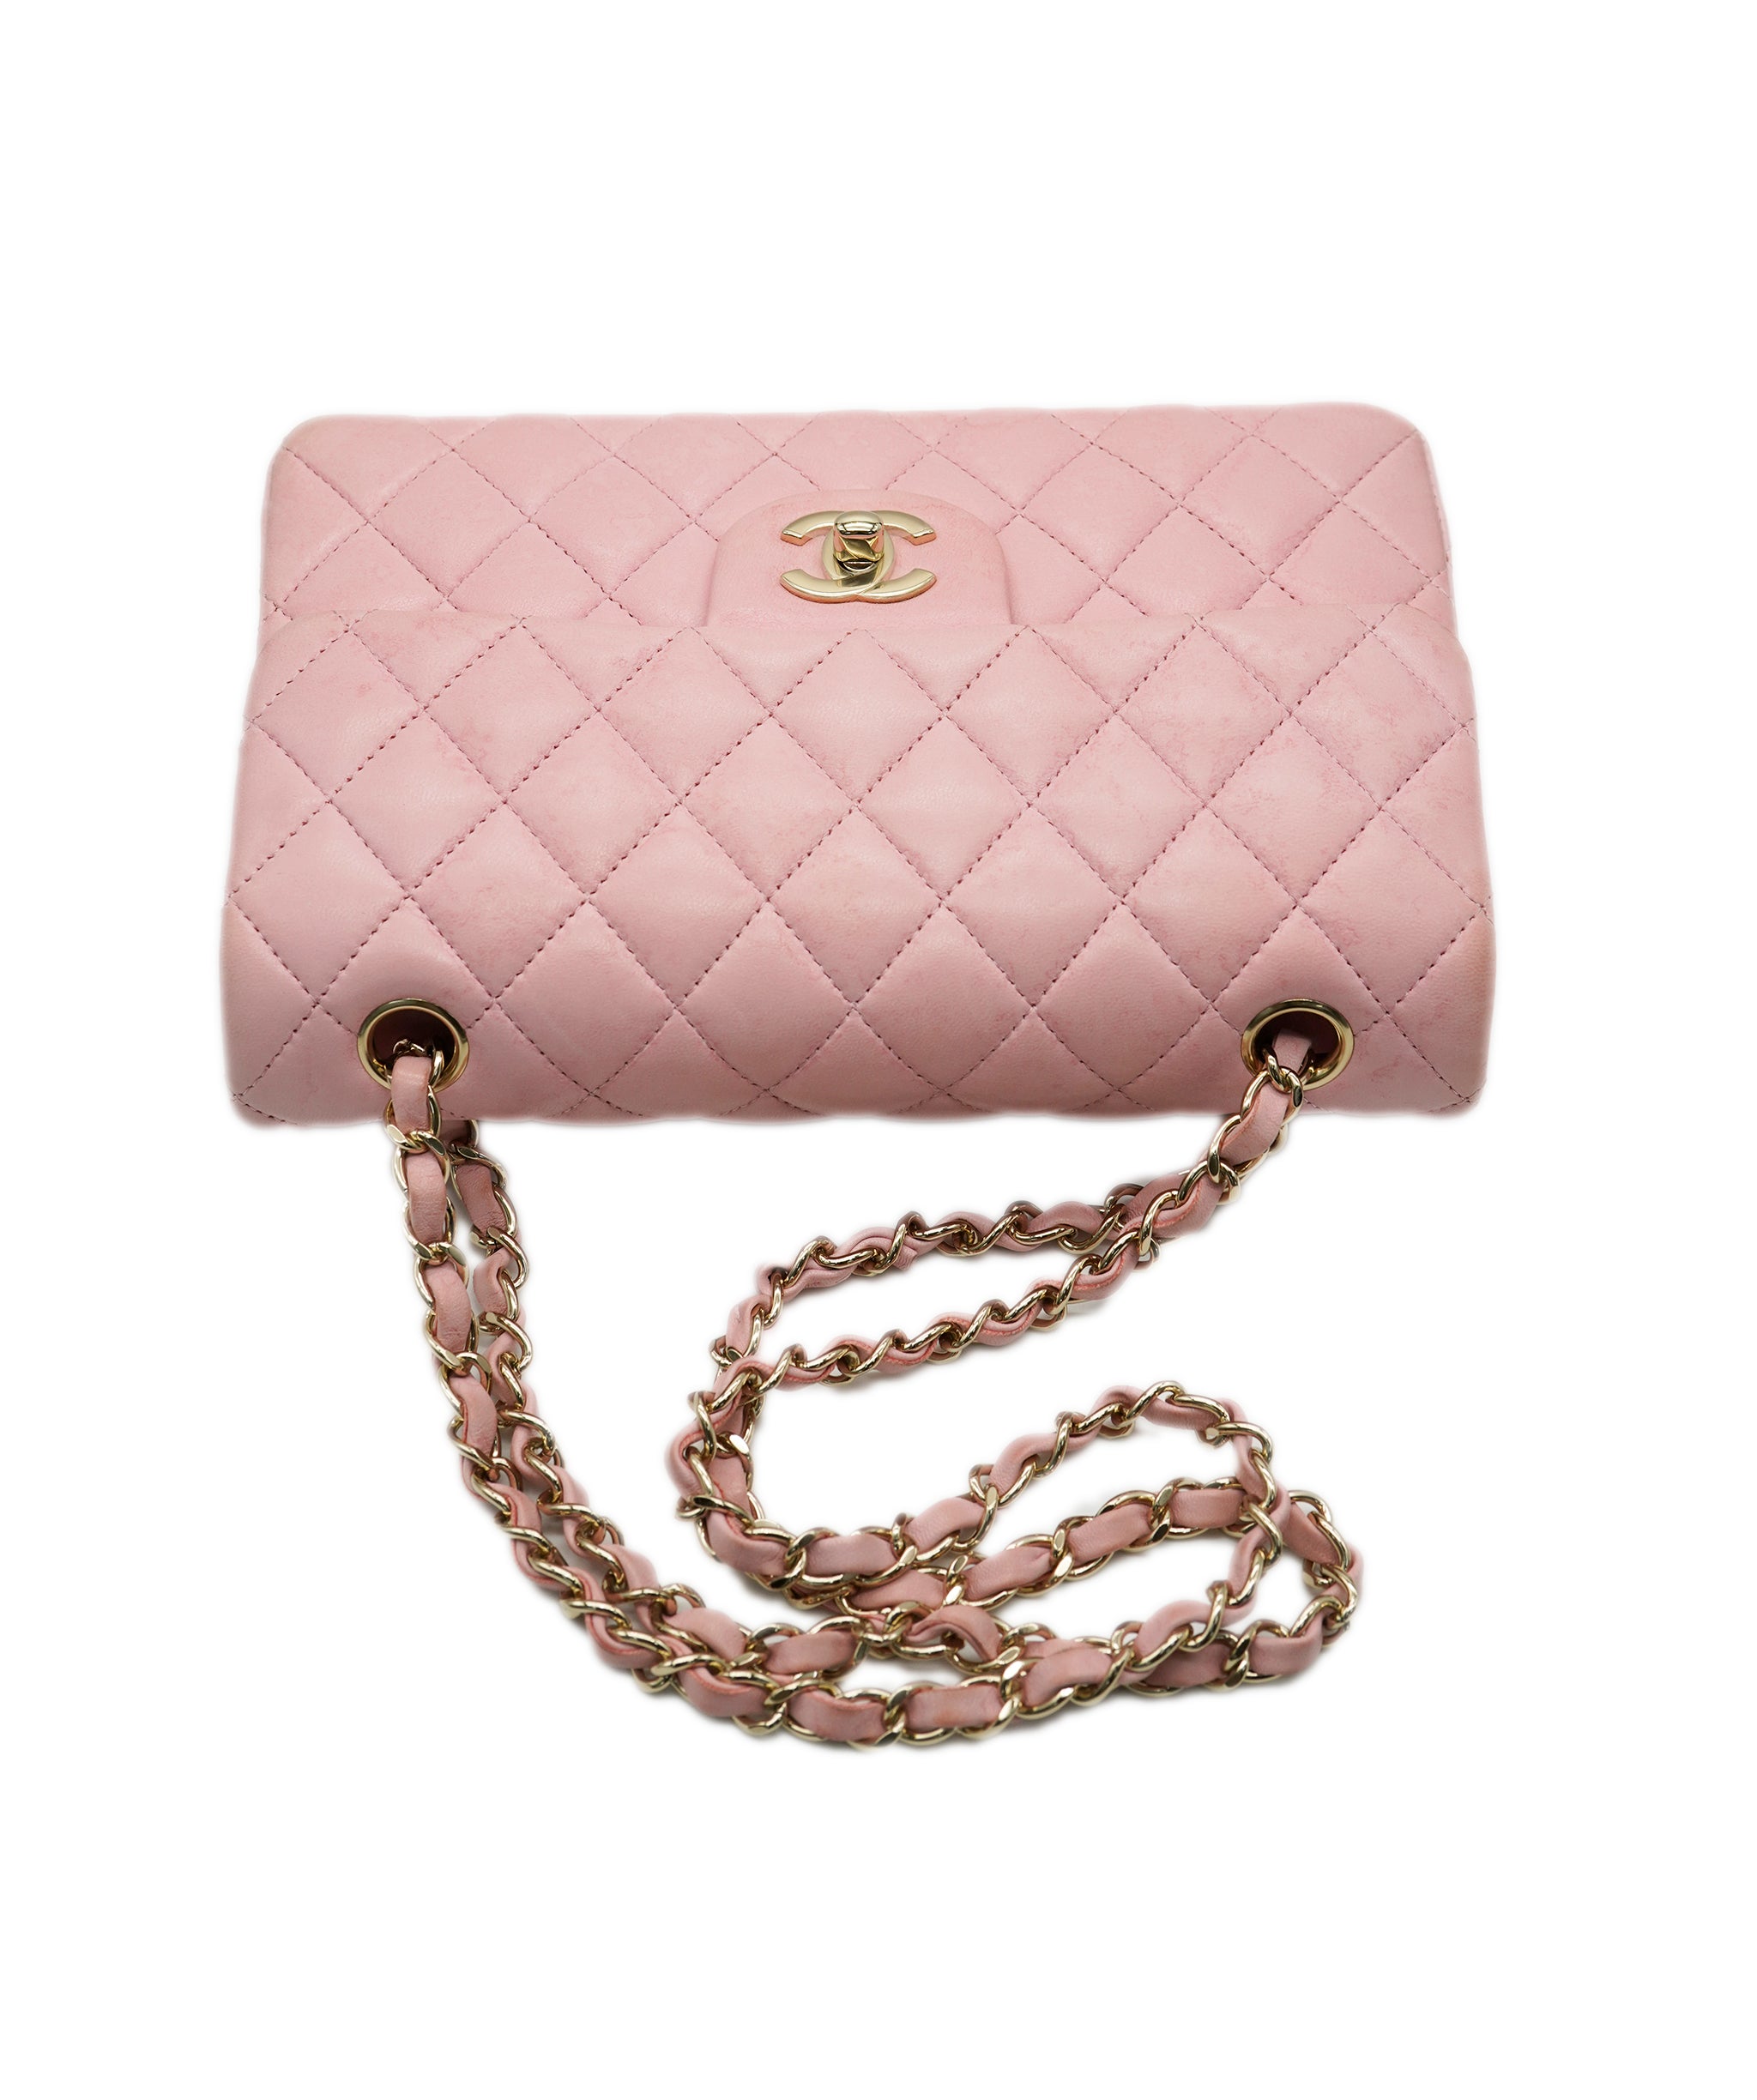 Chanel Pink Classic Flap with Gold Hardware  ALC1300